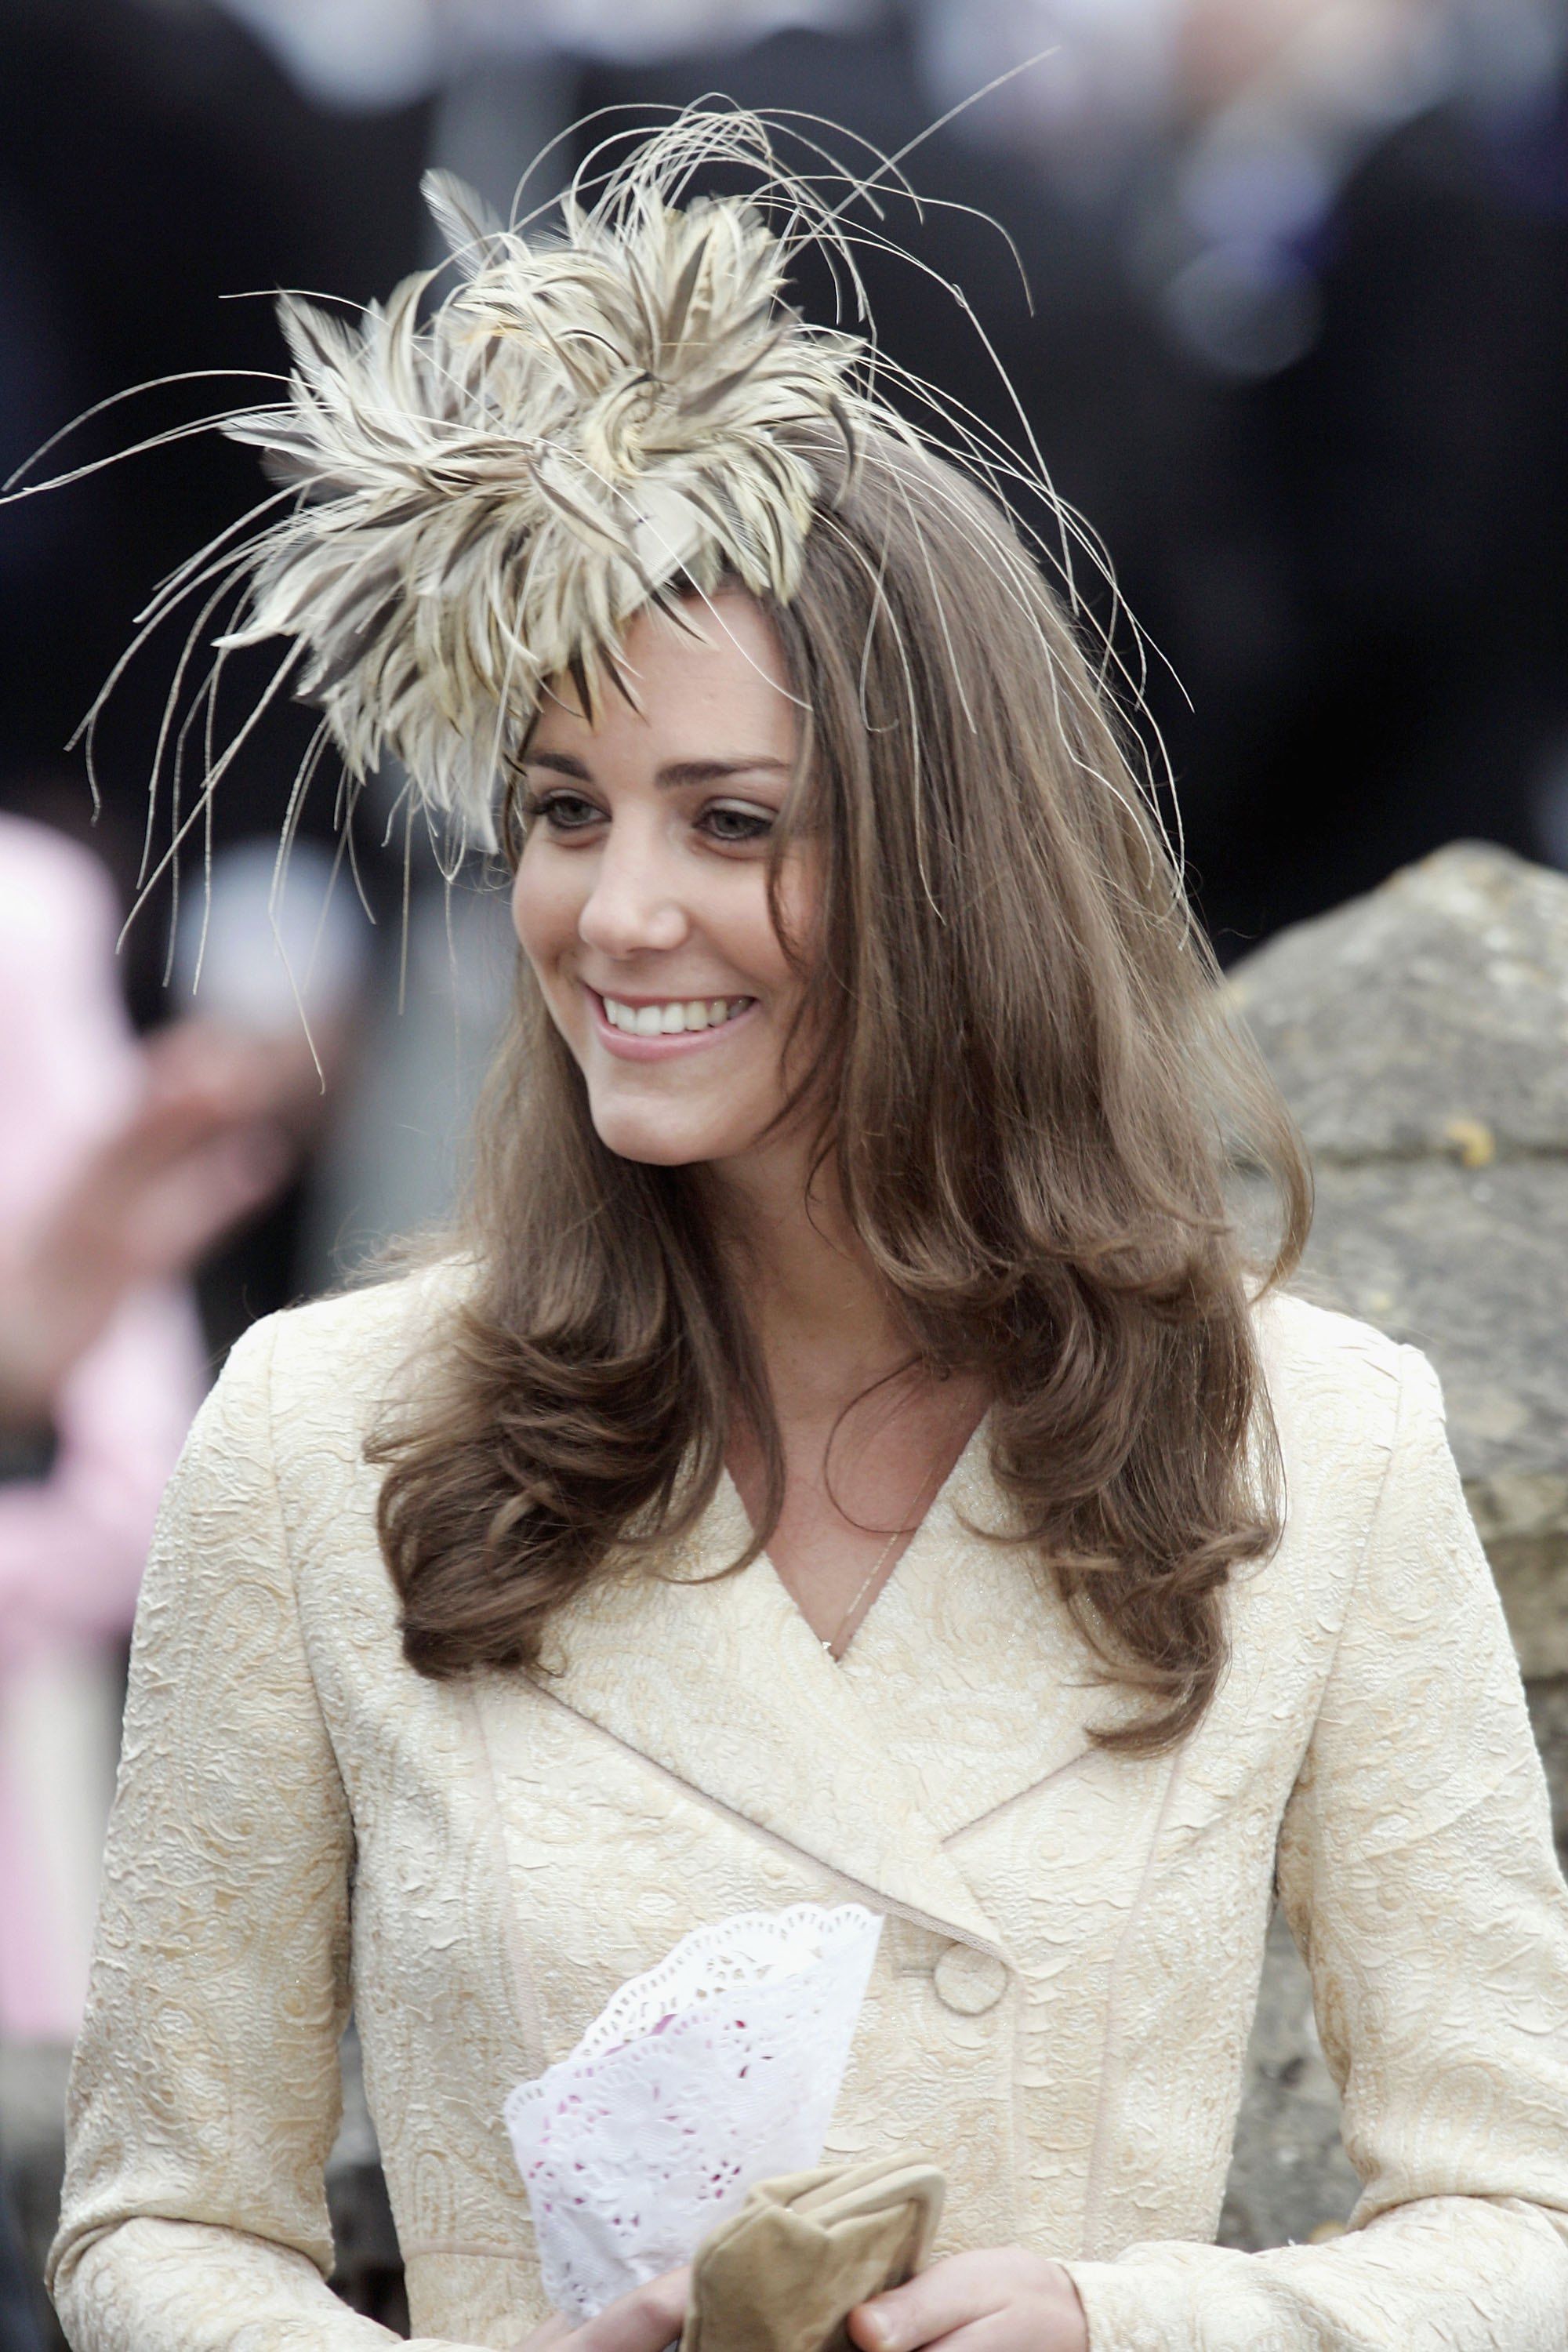 The Duchess of Cambridge at the wedding of Laura Parker-Bowles and Harry Lopes in 2006 | Source: Getty Images